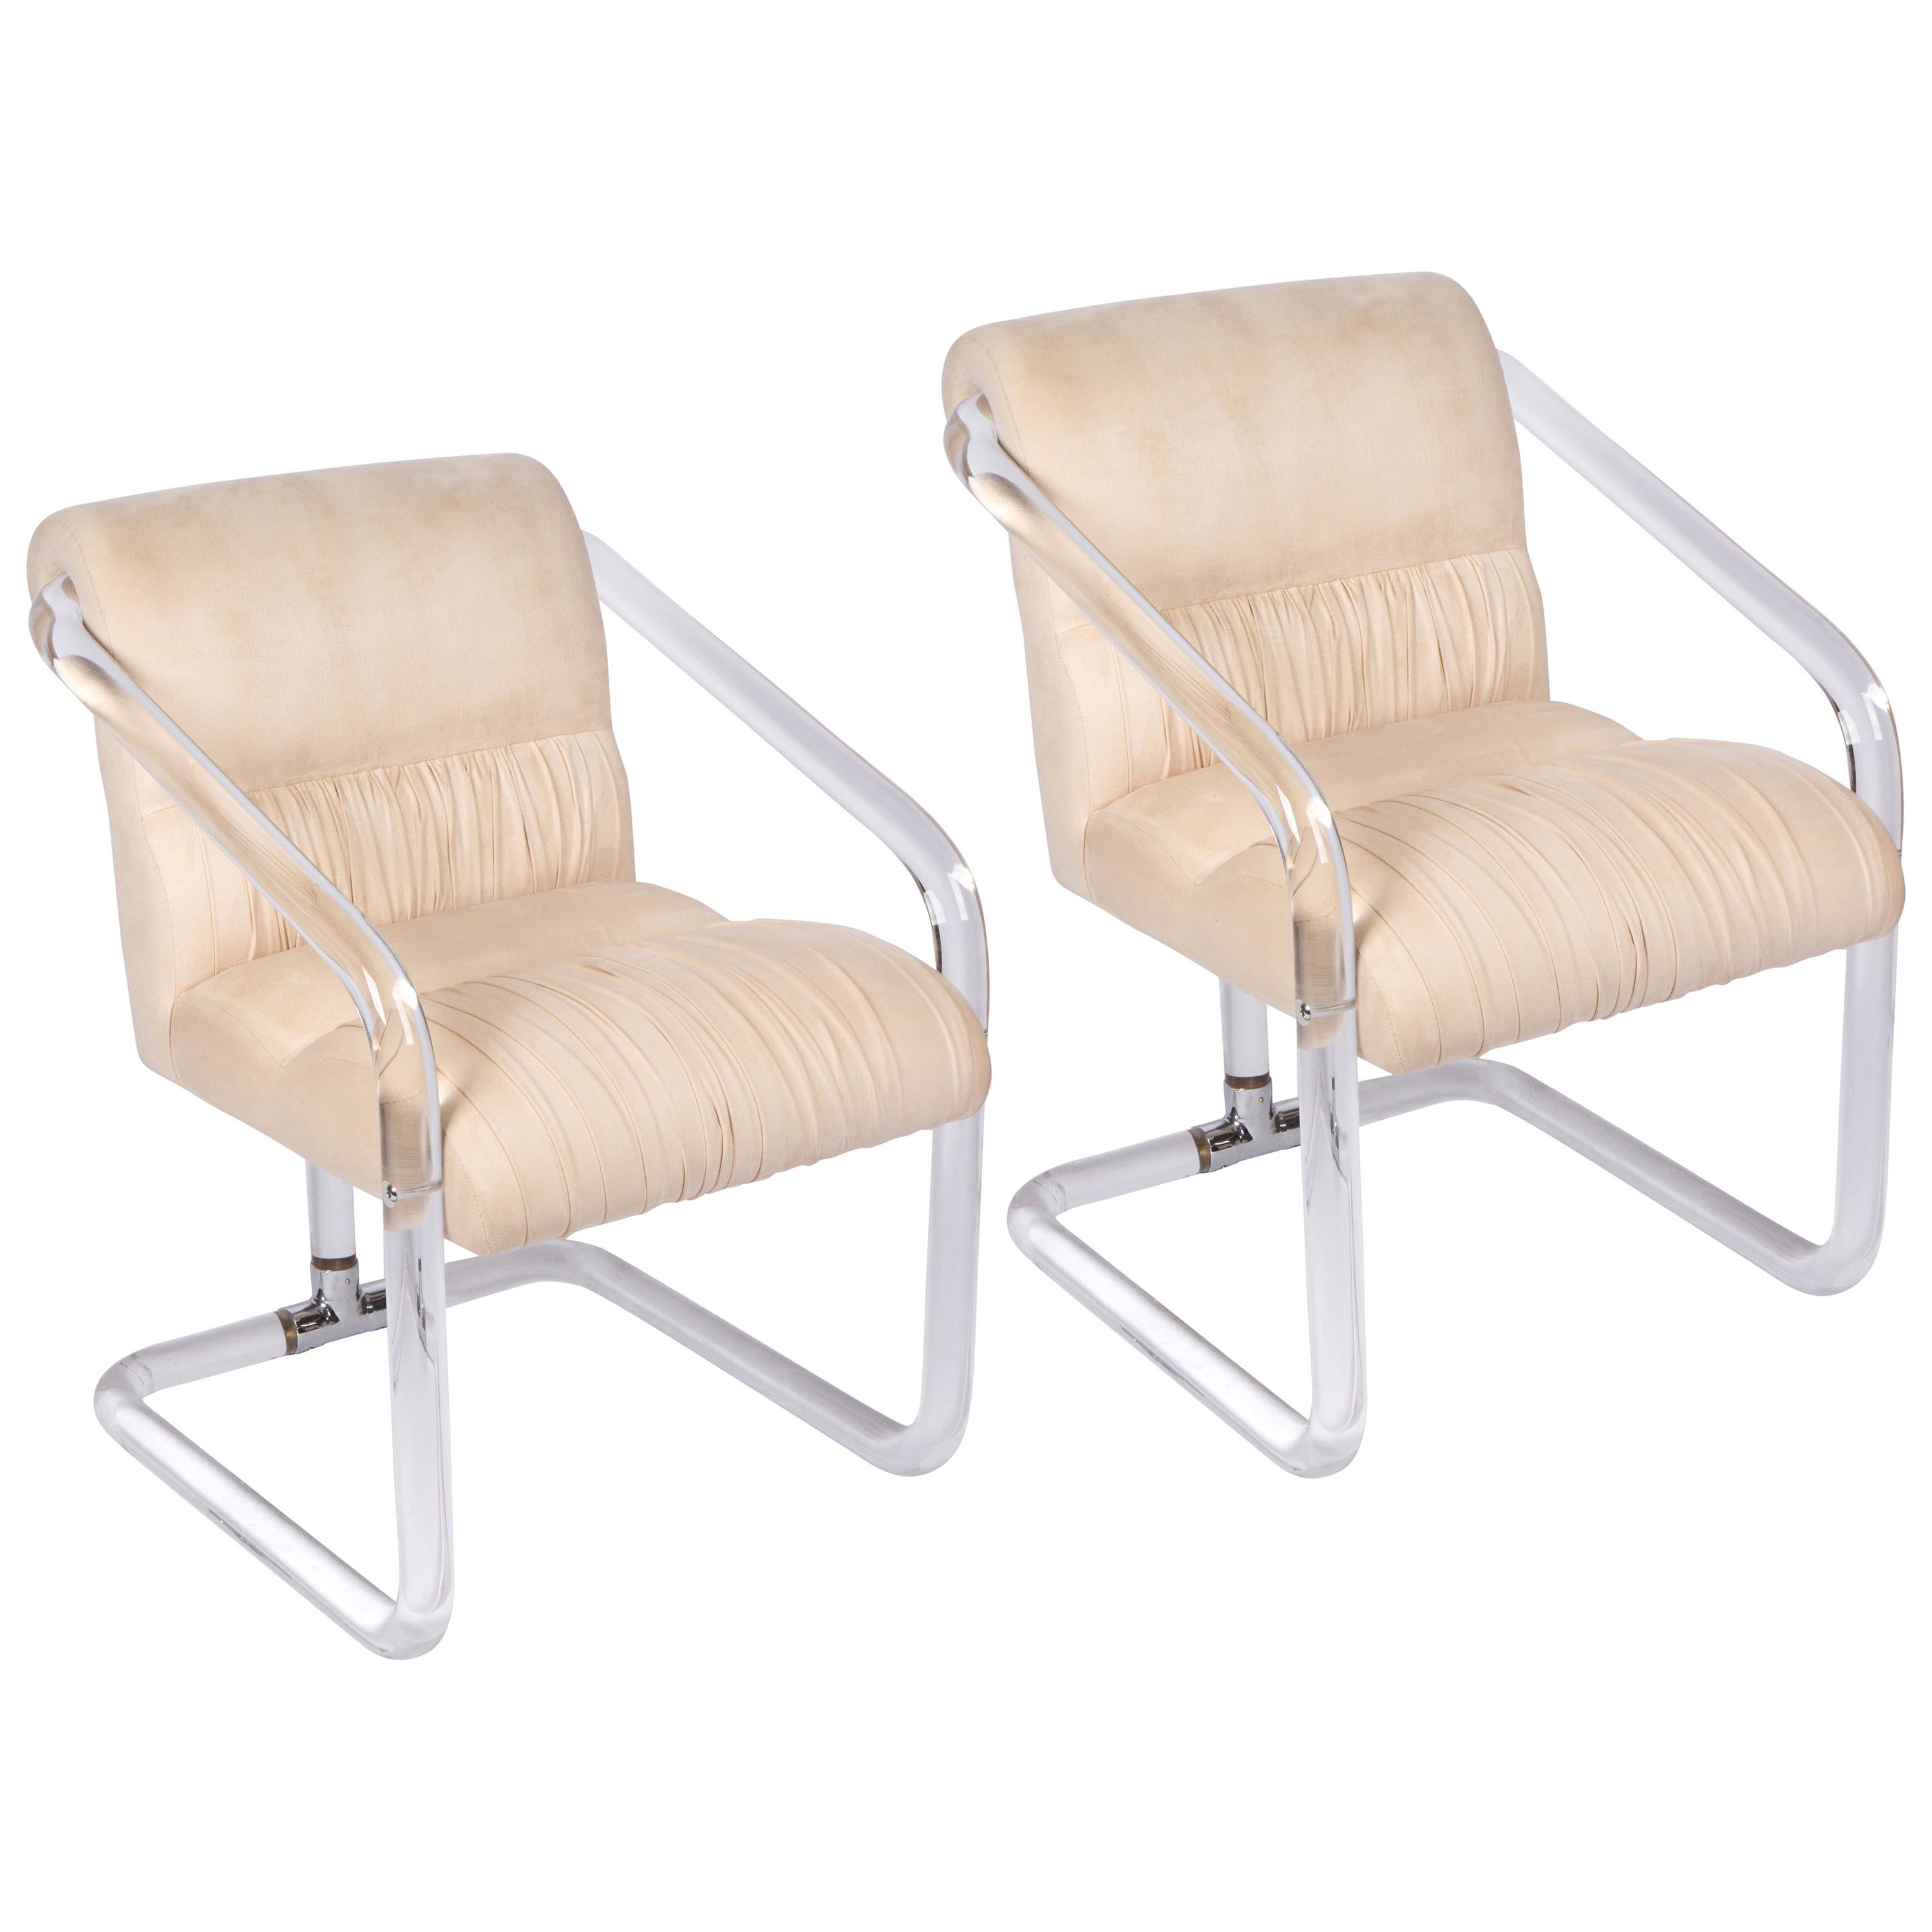 Pair of Lucite and Chrome Chairs by Lion in Frost